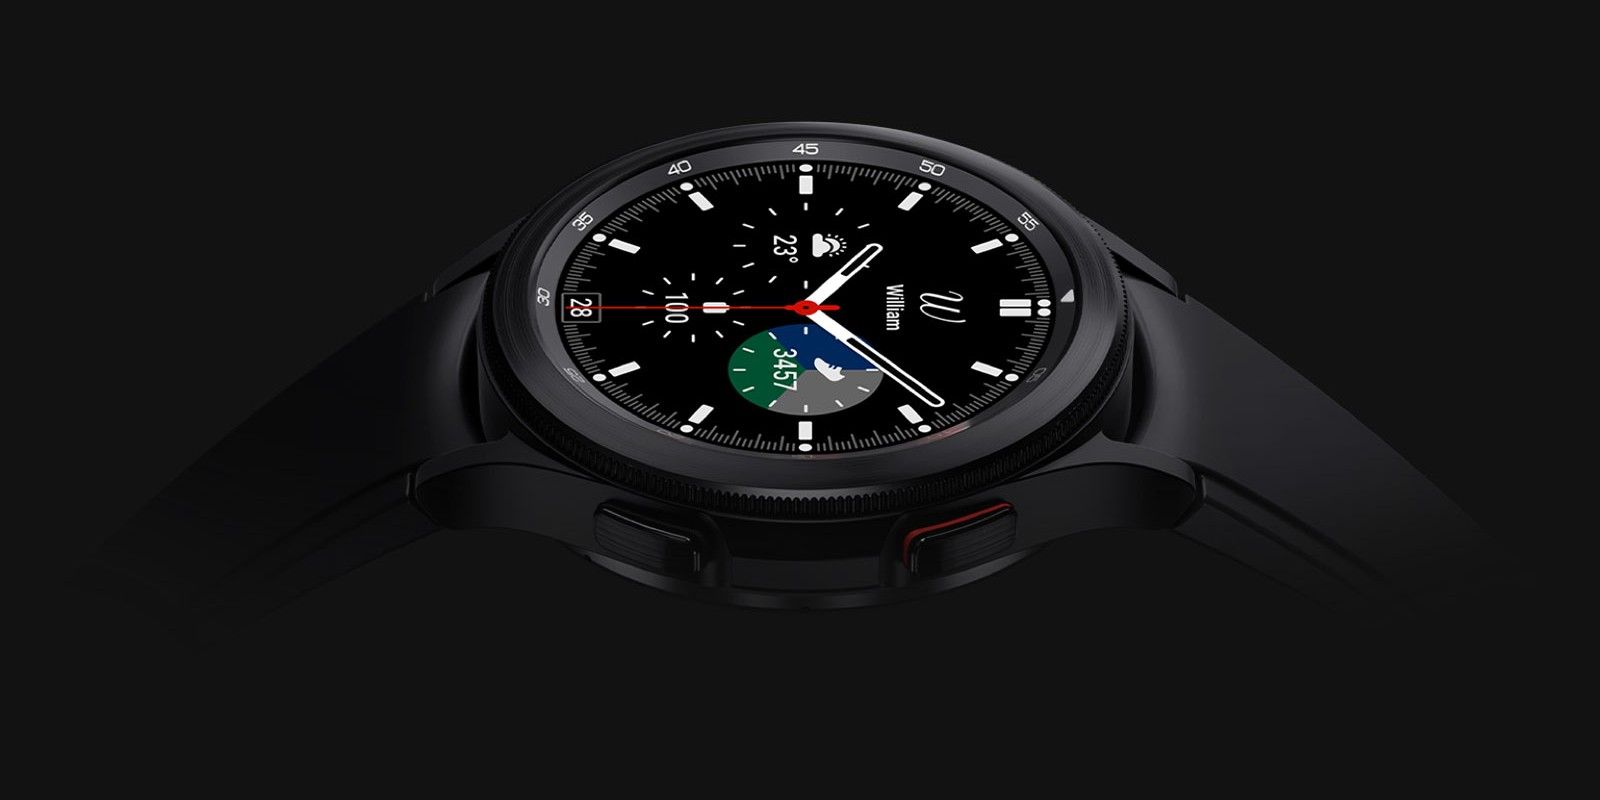 The Galaxy Watch 4 Classic's successor will launch as the Galaxy Watch 5 Pro